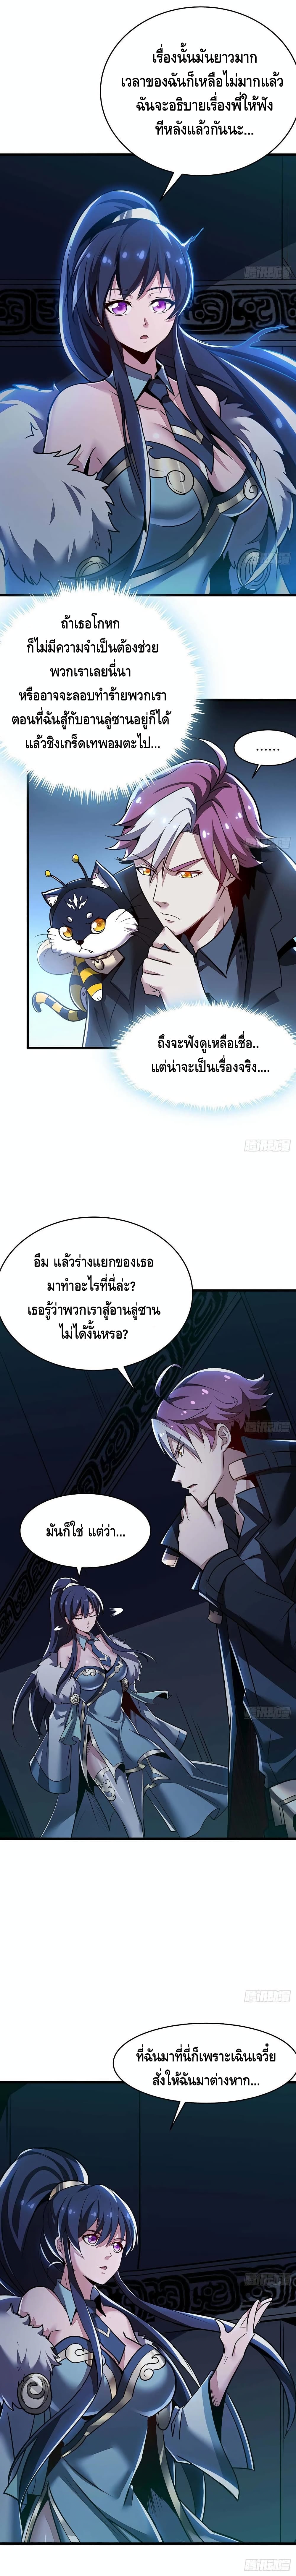 Undead King Beyond 63 (11)